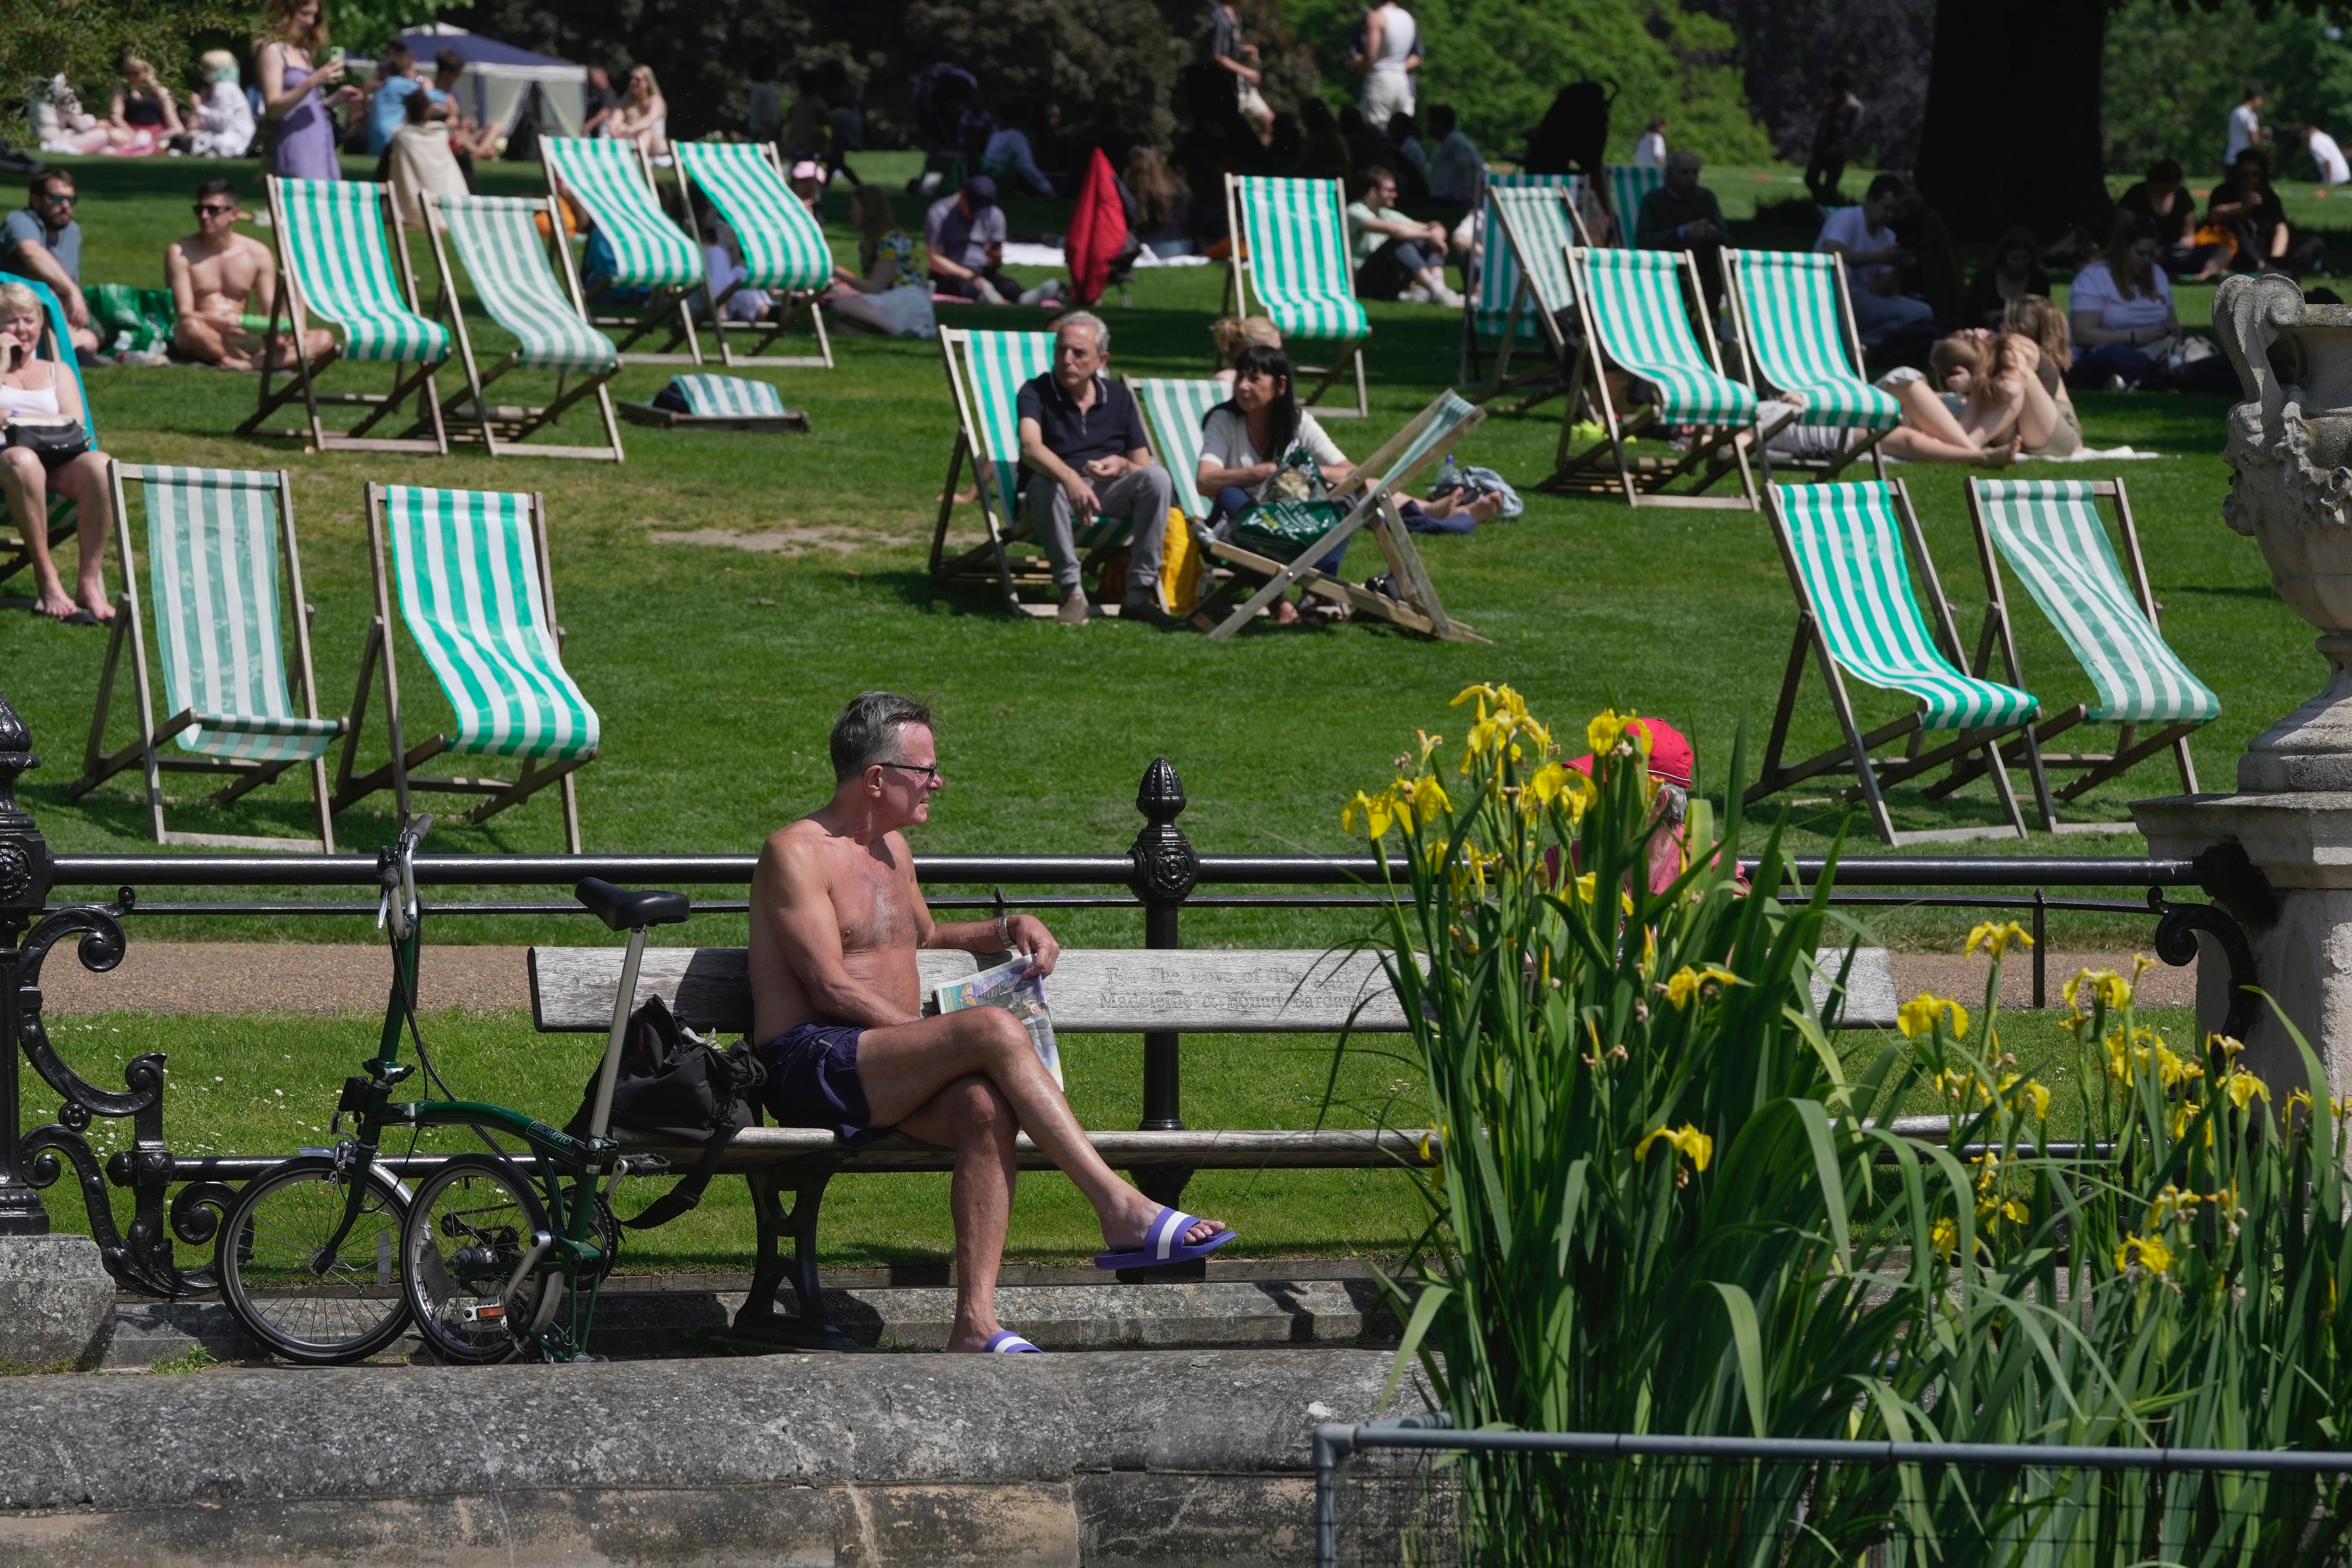 People enjoy the sunny weather at a park in London on Sunday